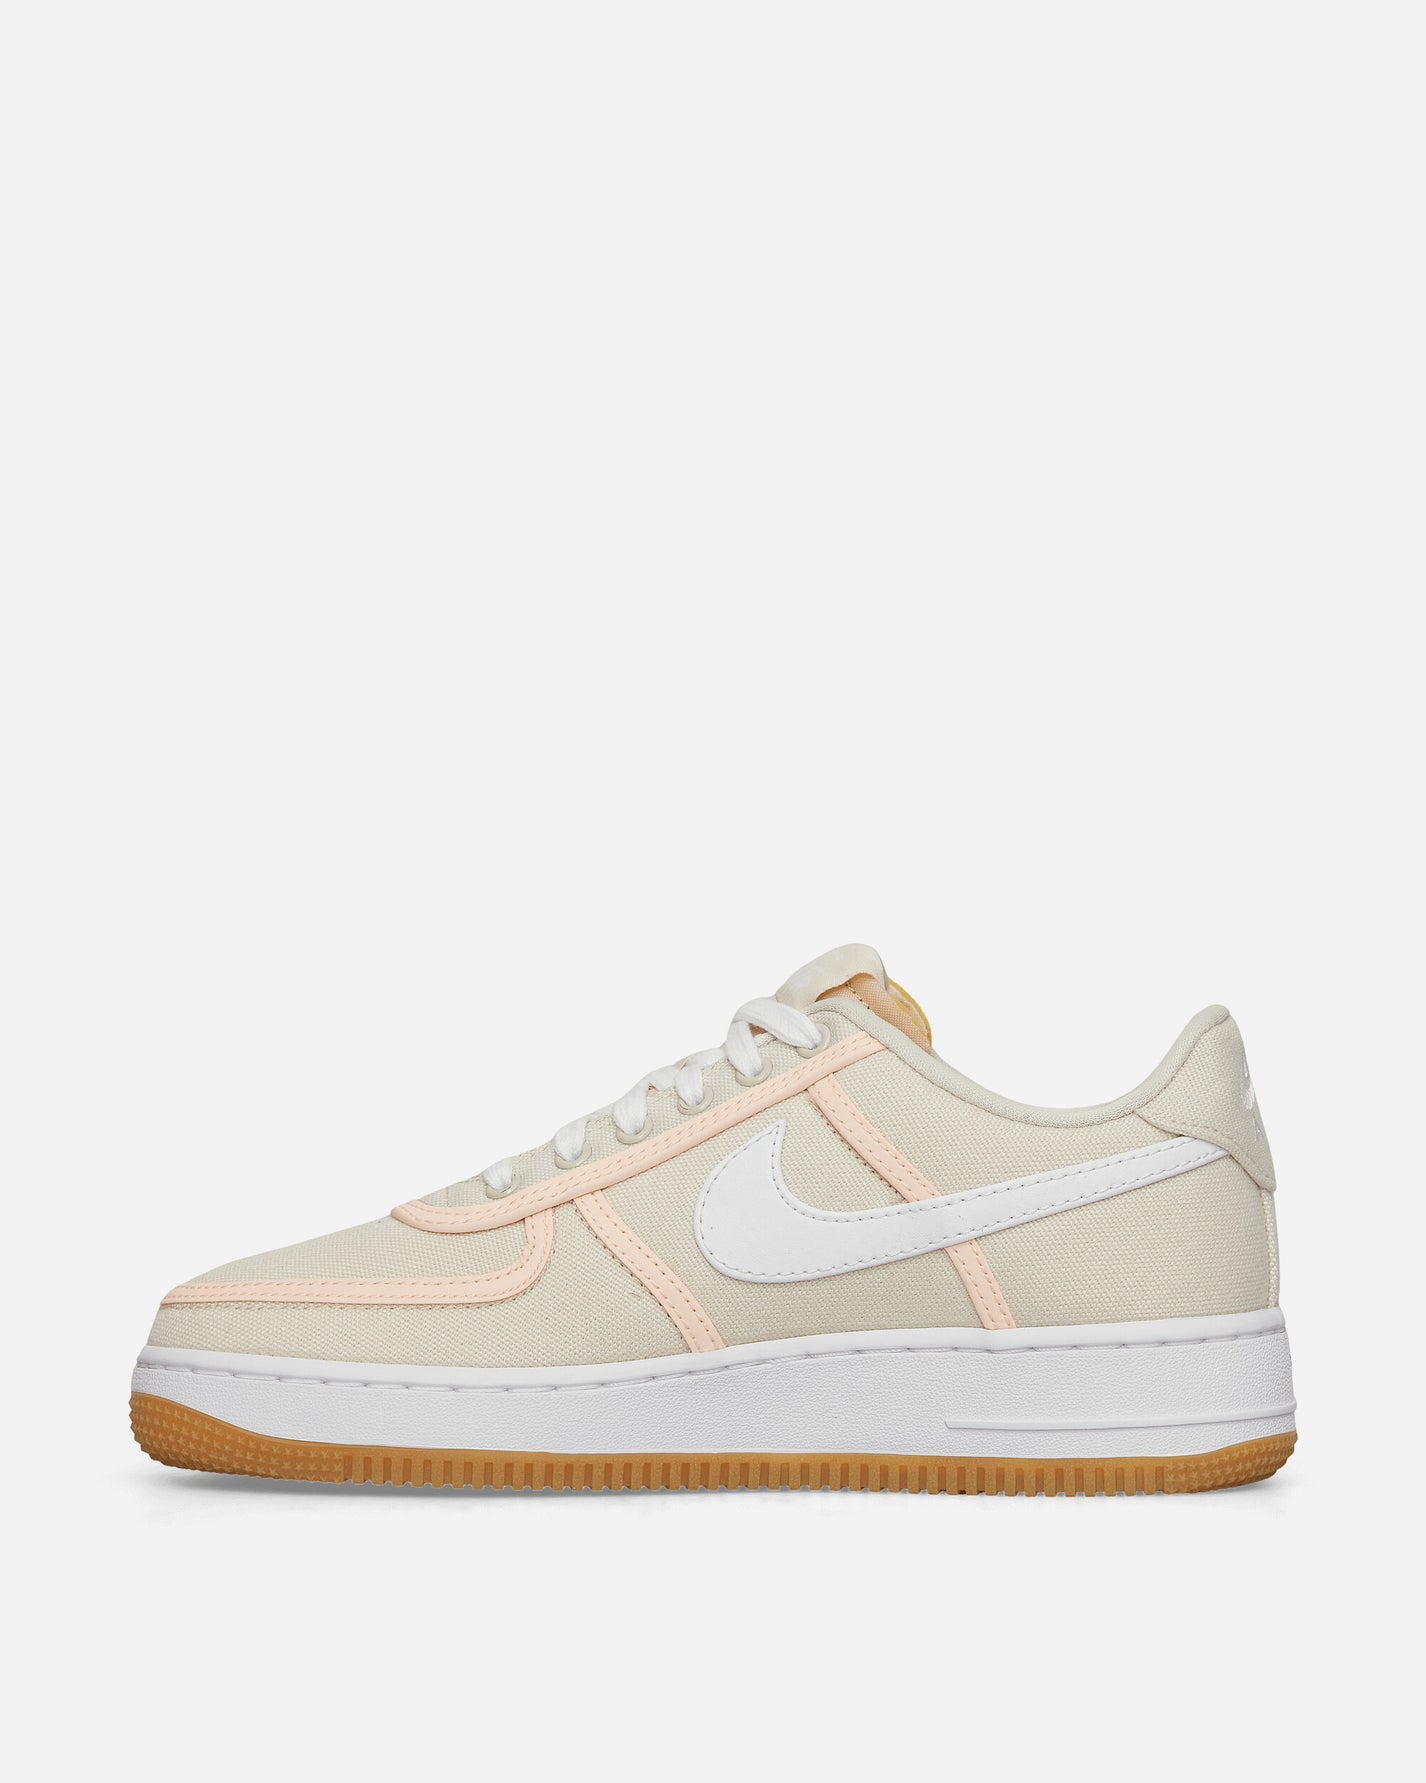 Nike Air Force 1 '07 Prm Light Cream/White Sneakers Low CI9349-200